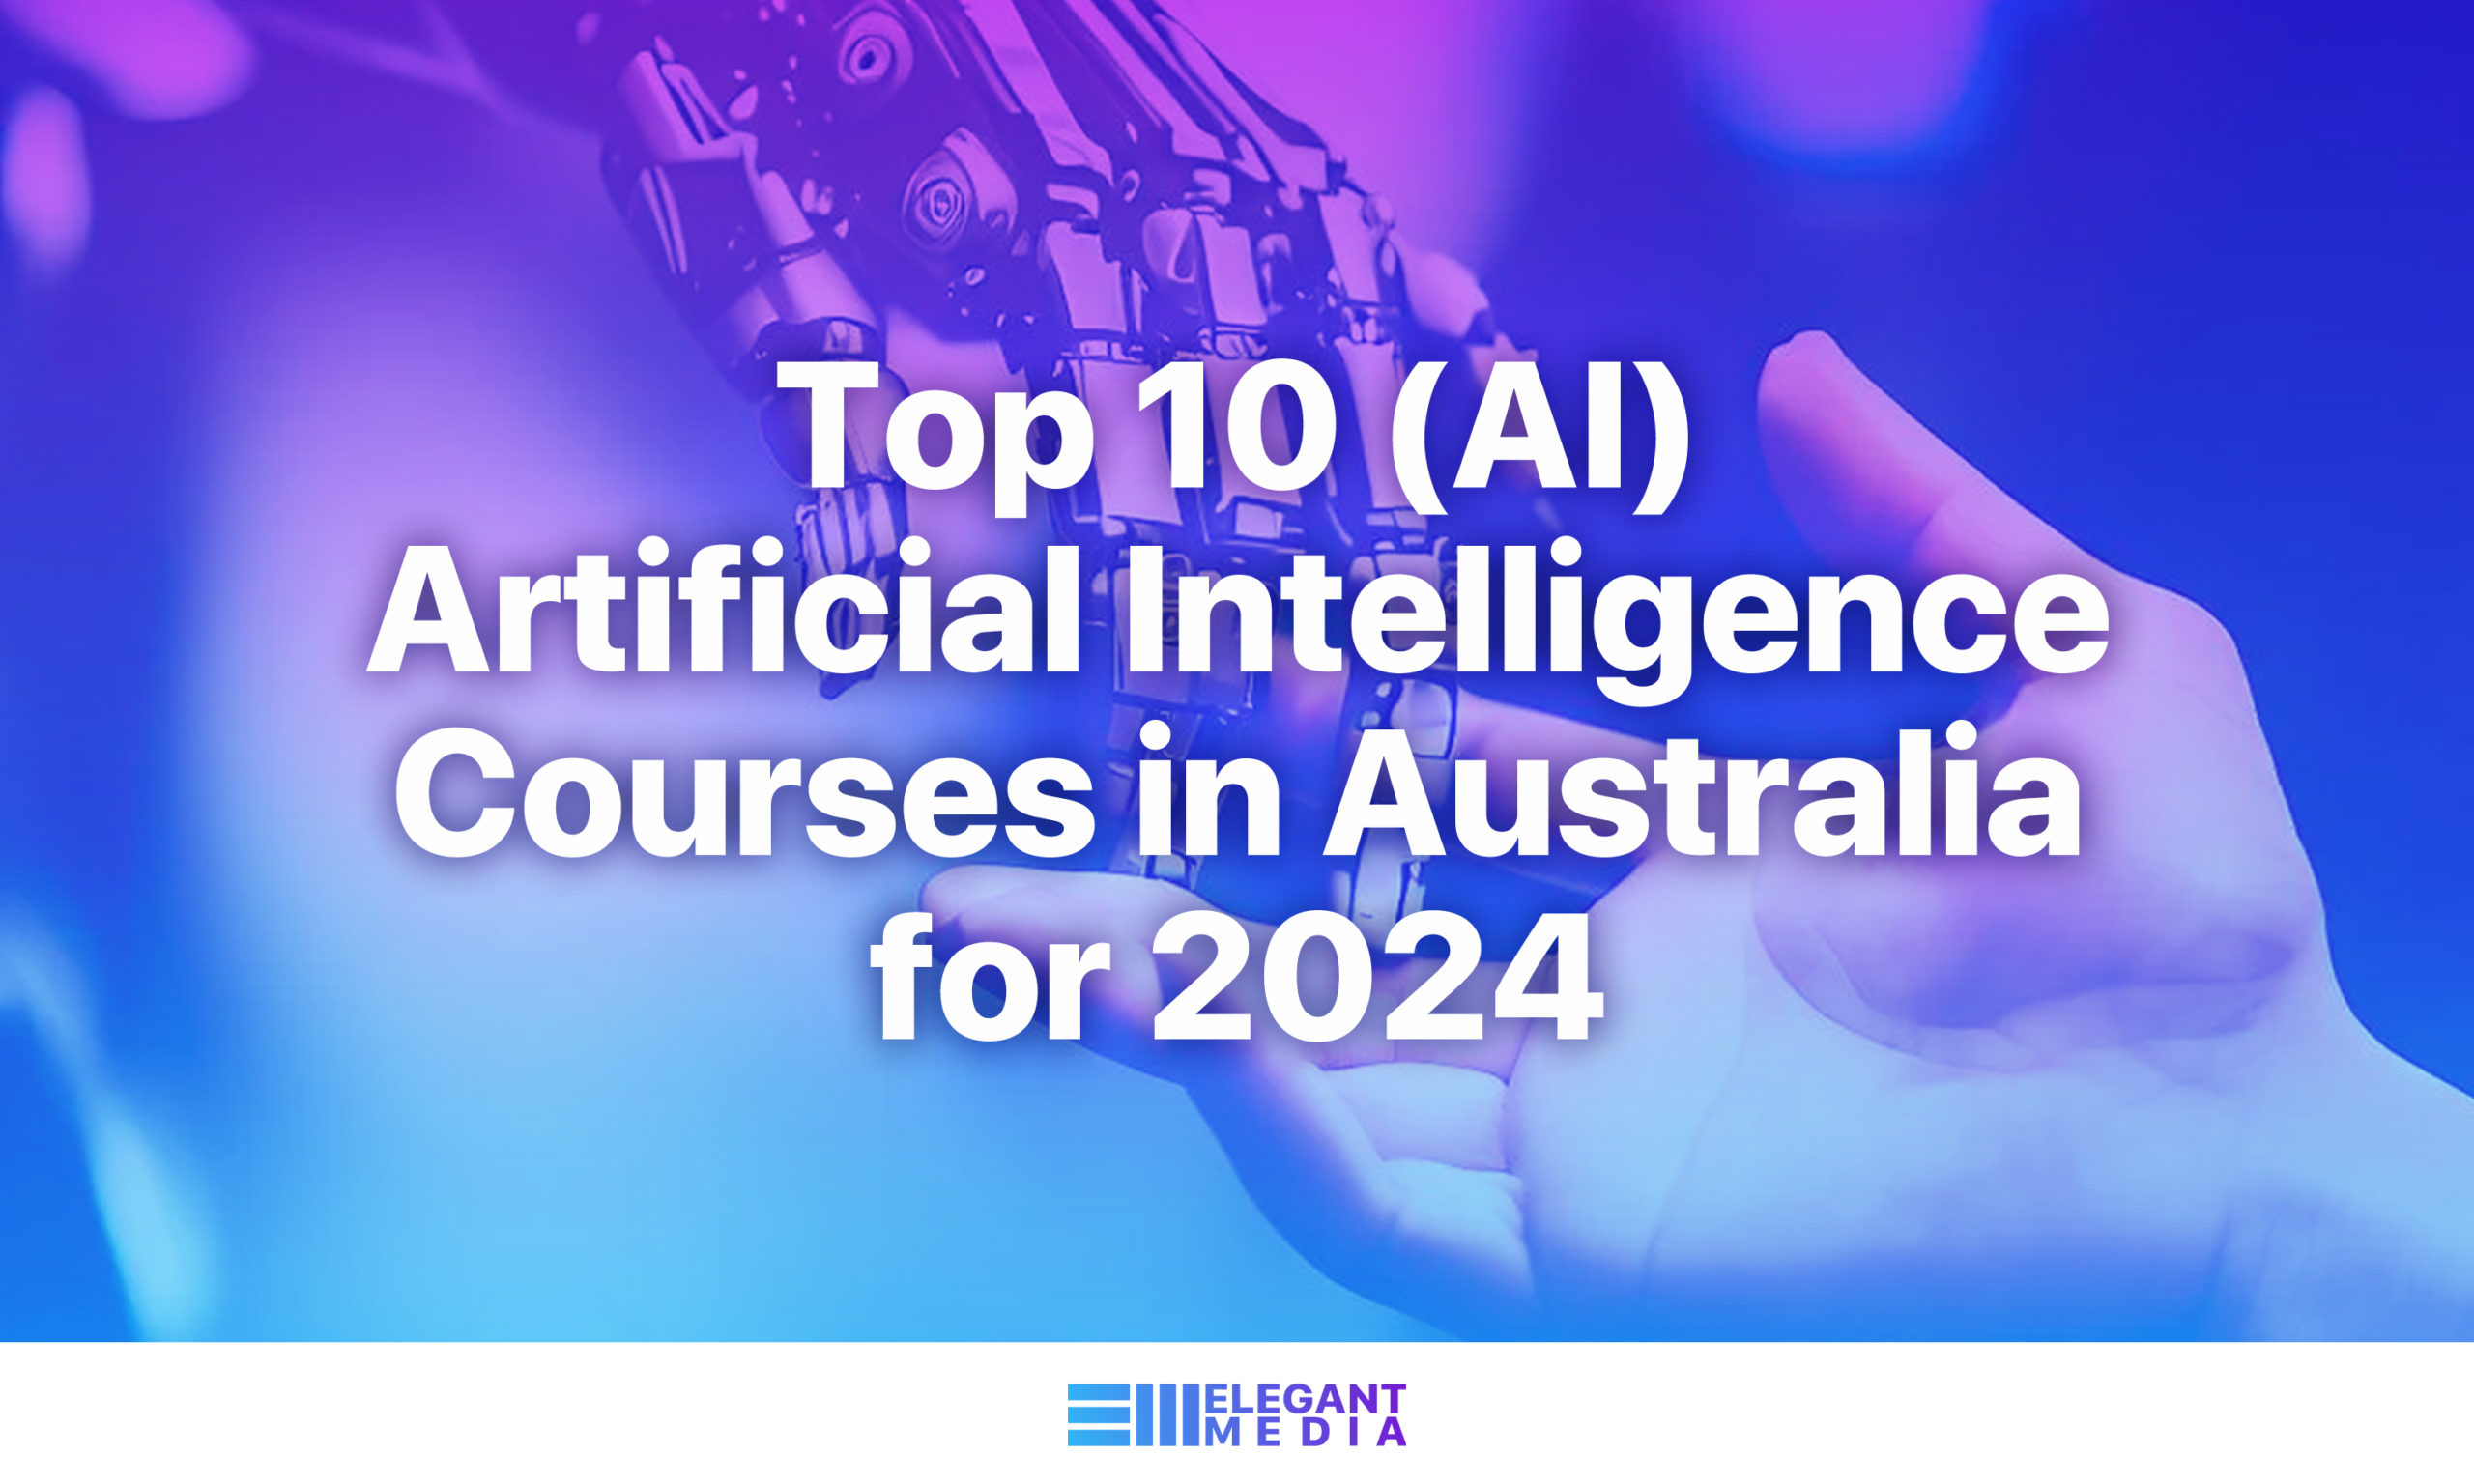 Top 10 (AI) Artificial Intelligence Courses in Australia for 2024